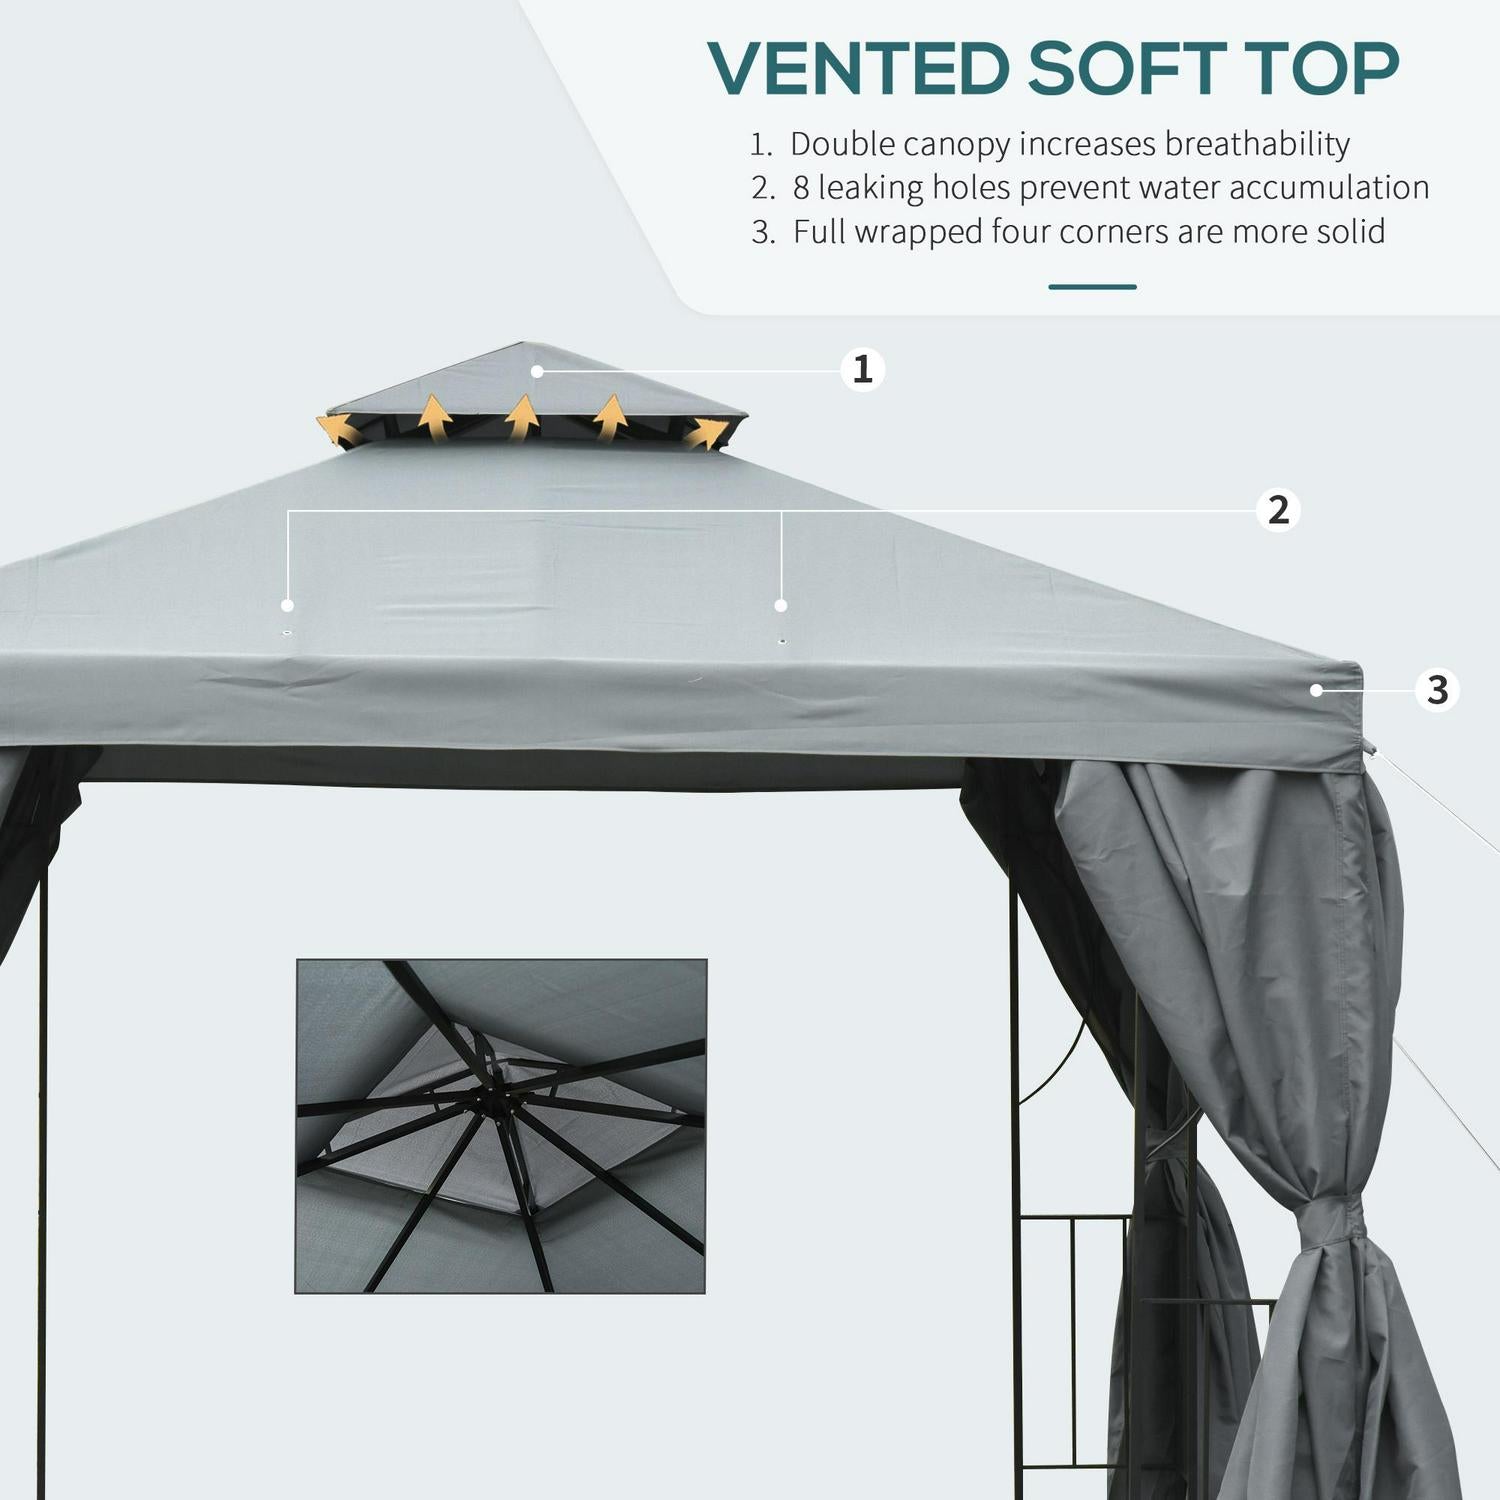 Metal Gazebo Garden Marquee Patio Tent Pavilion Canopy Shade Shelter